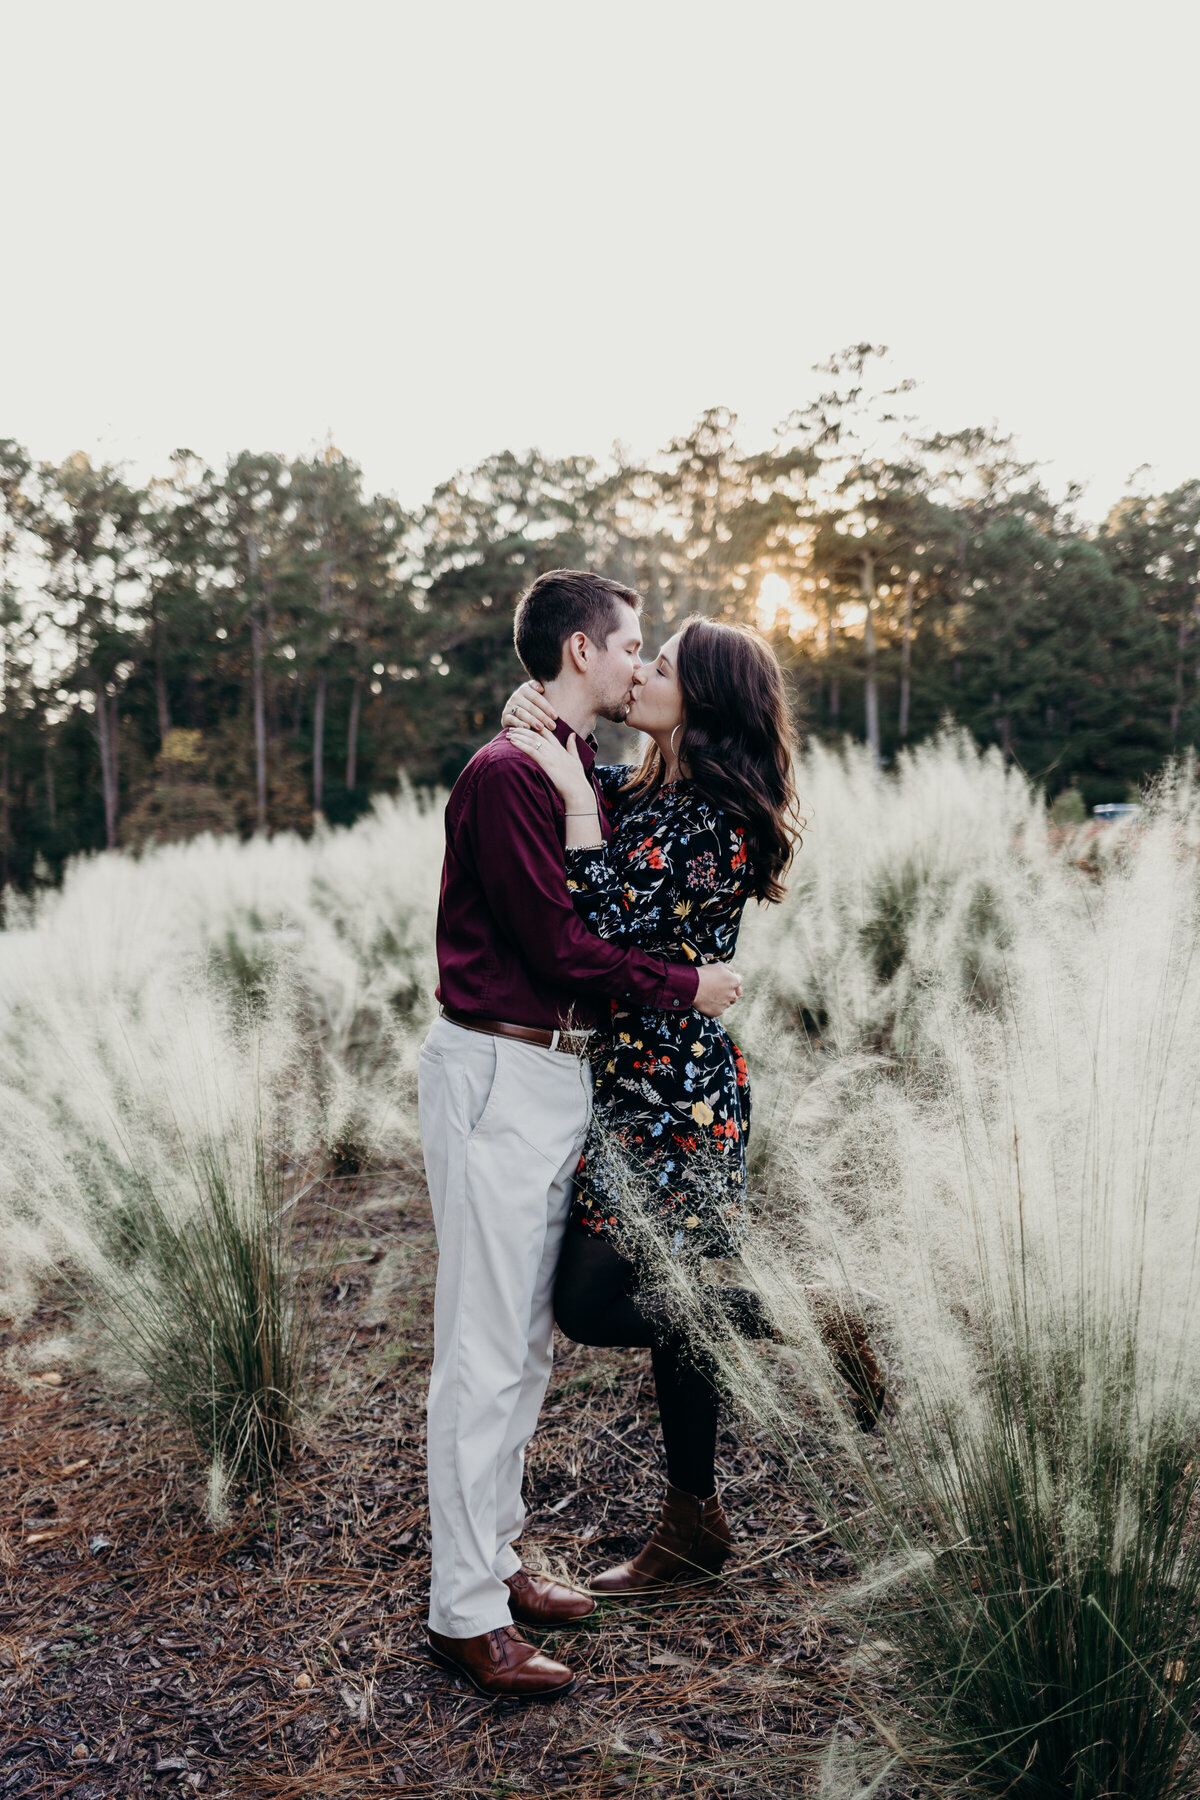 Christine Quarte Photography - Engagement Red Top Mountain in the plants